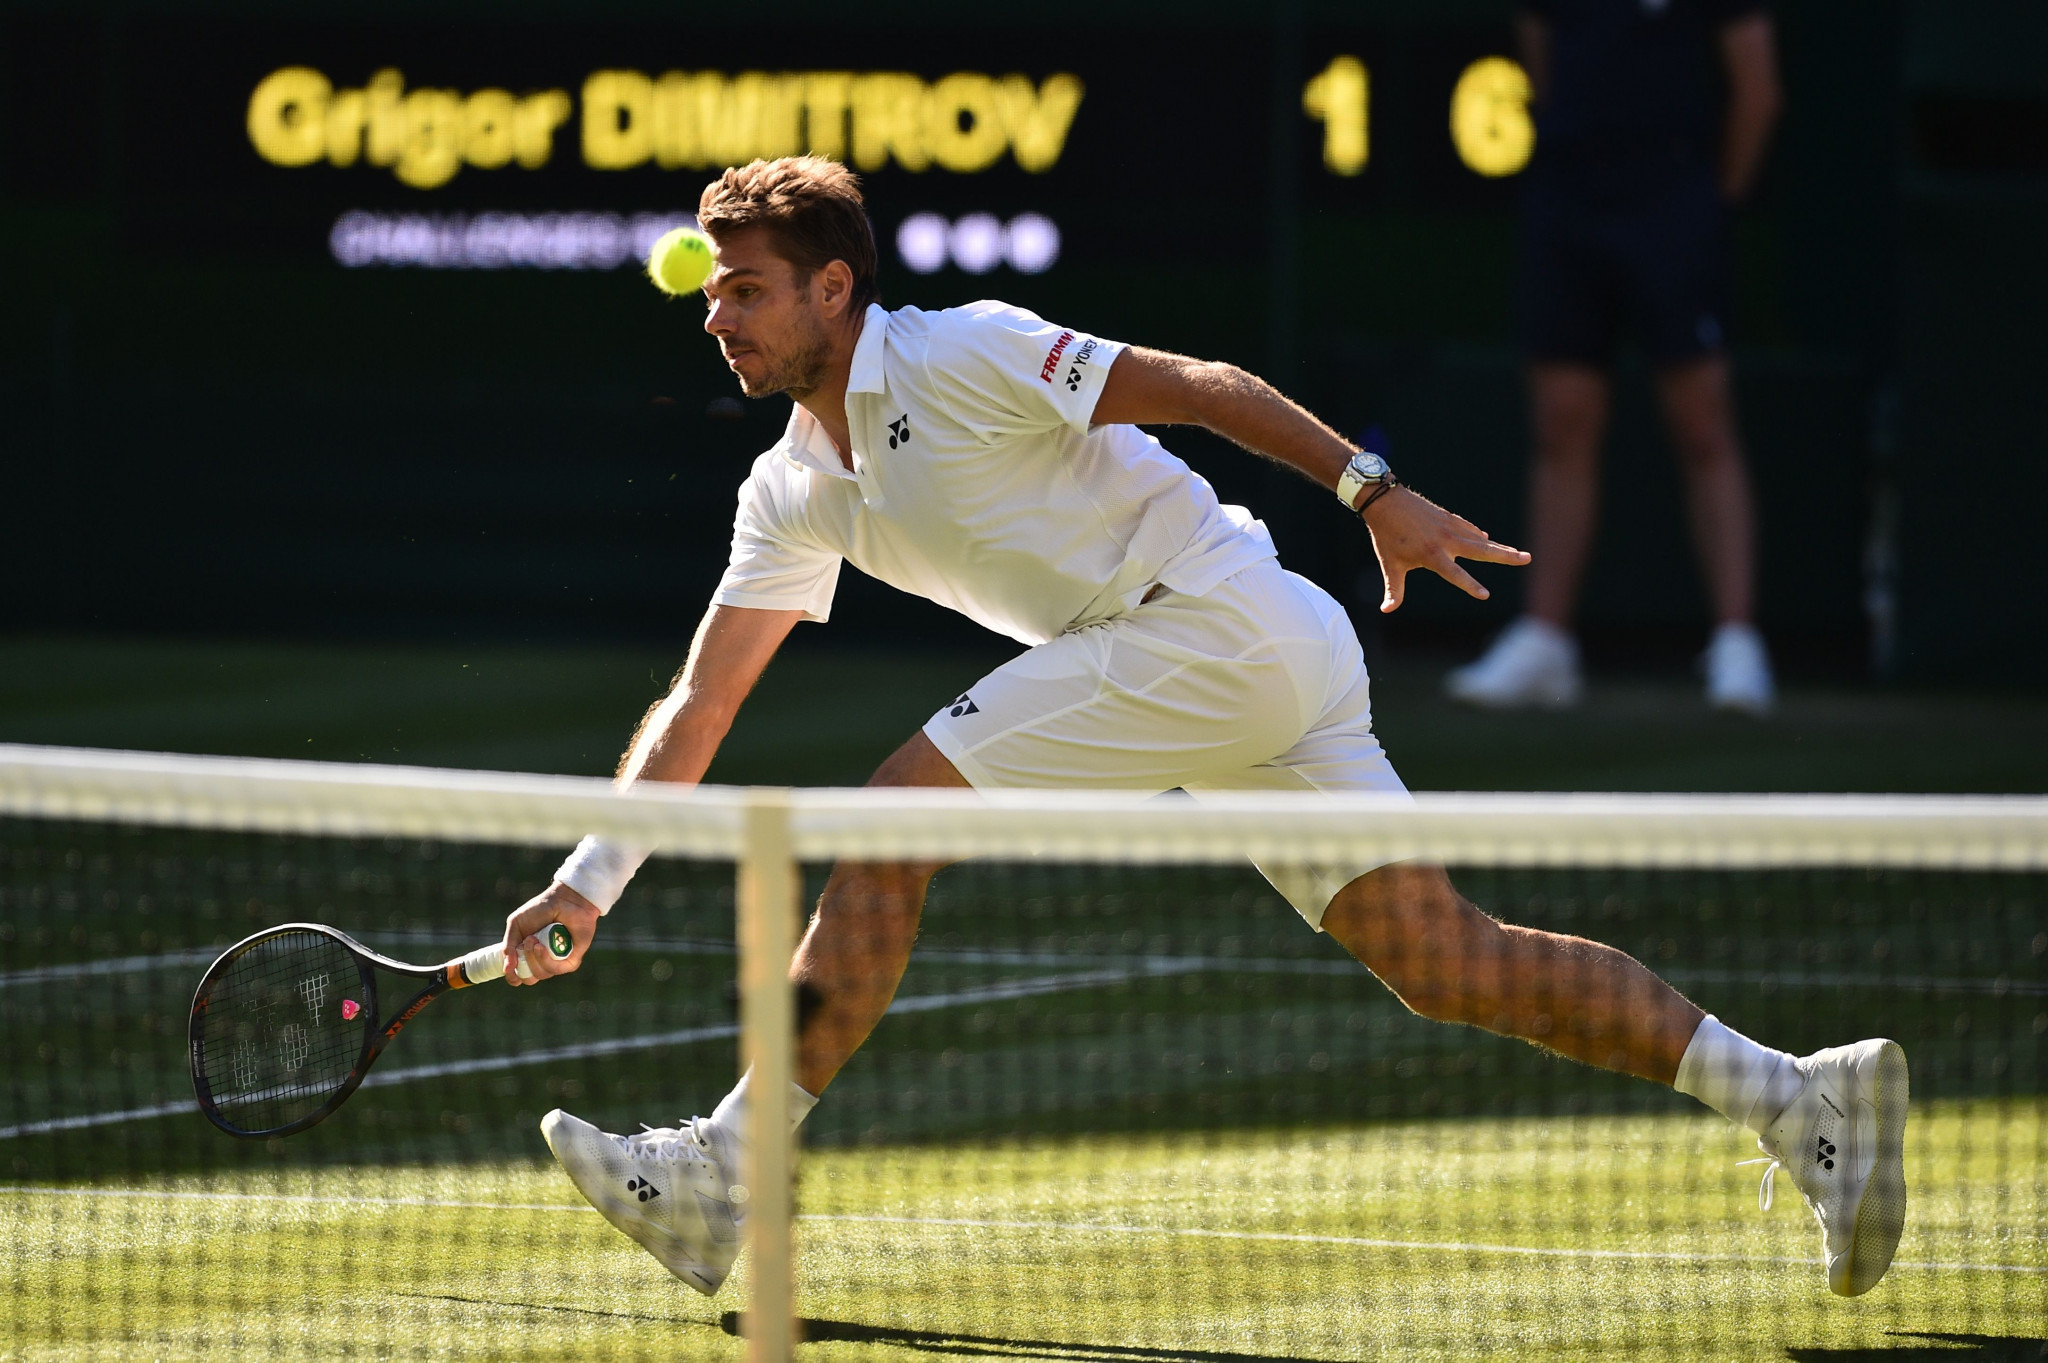 Switzerland's Stan Wawrinka came from a set down to beat Bulgaria's sixth seed Grigor Dimitrov in the game of the day as Wimbledon 2018 begun ©Getty Images